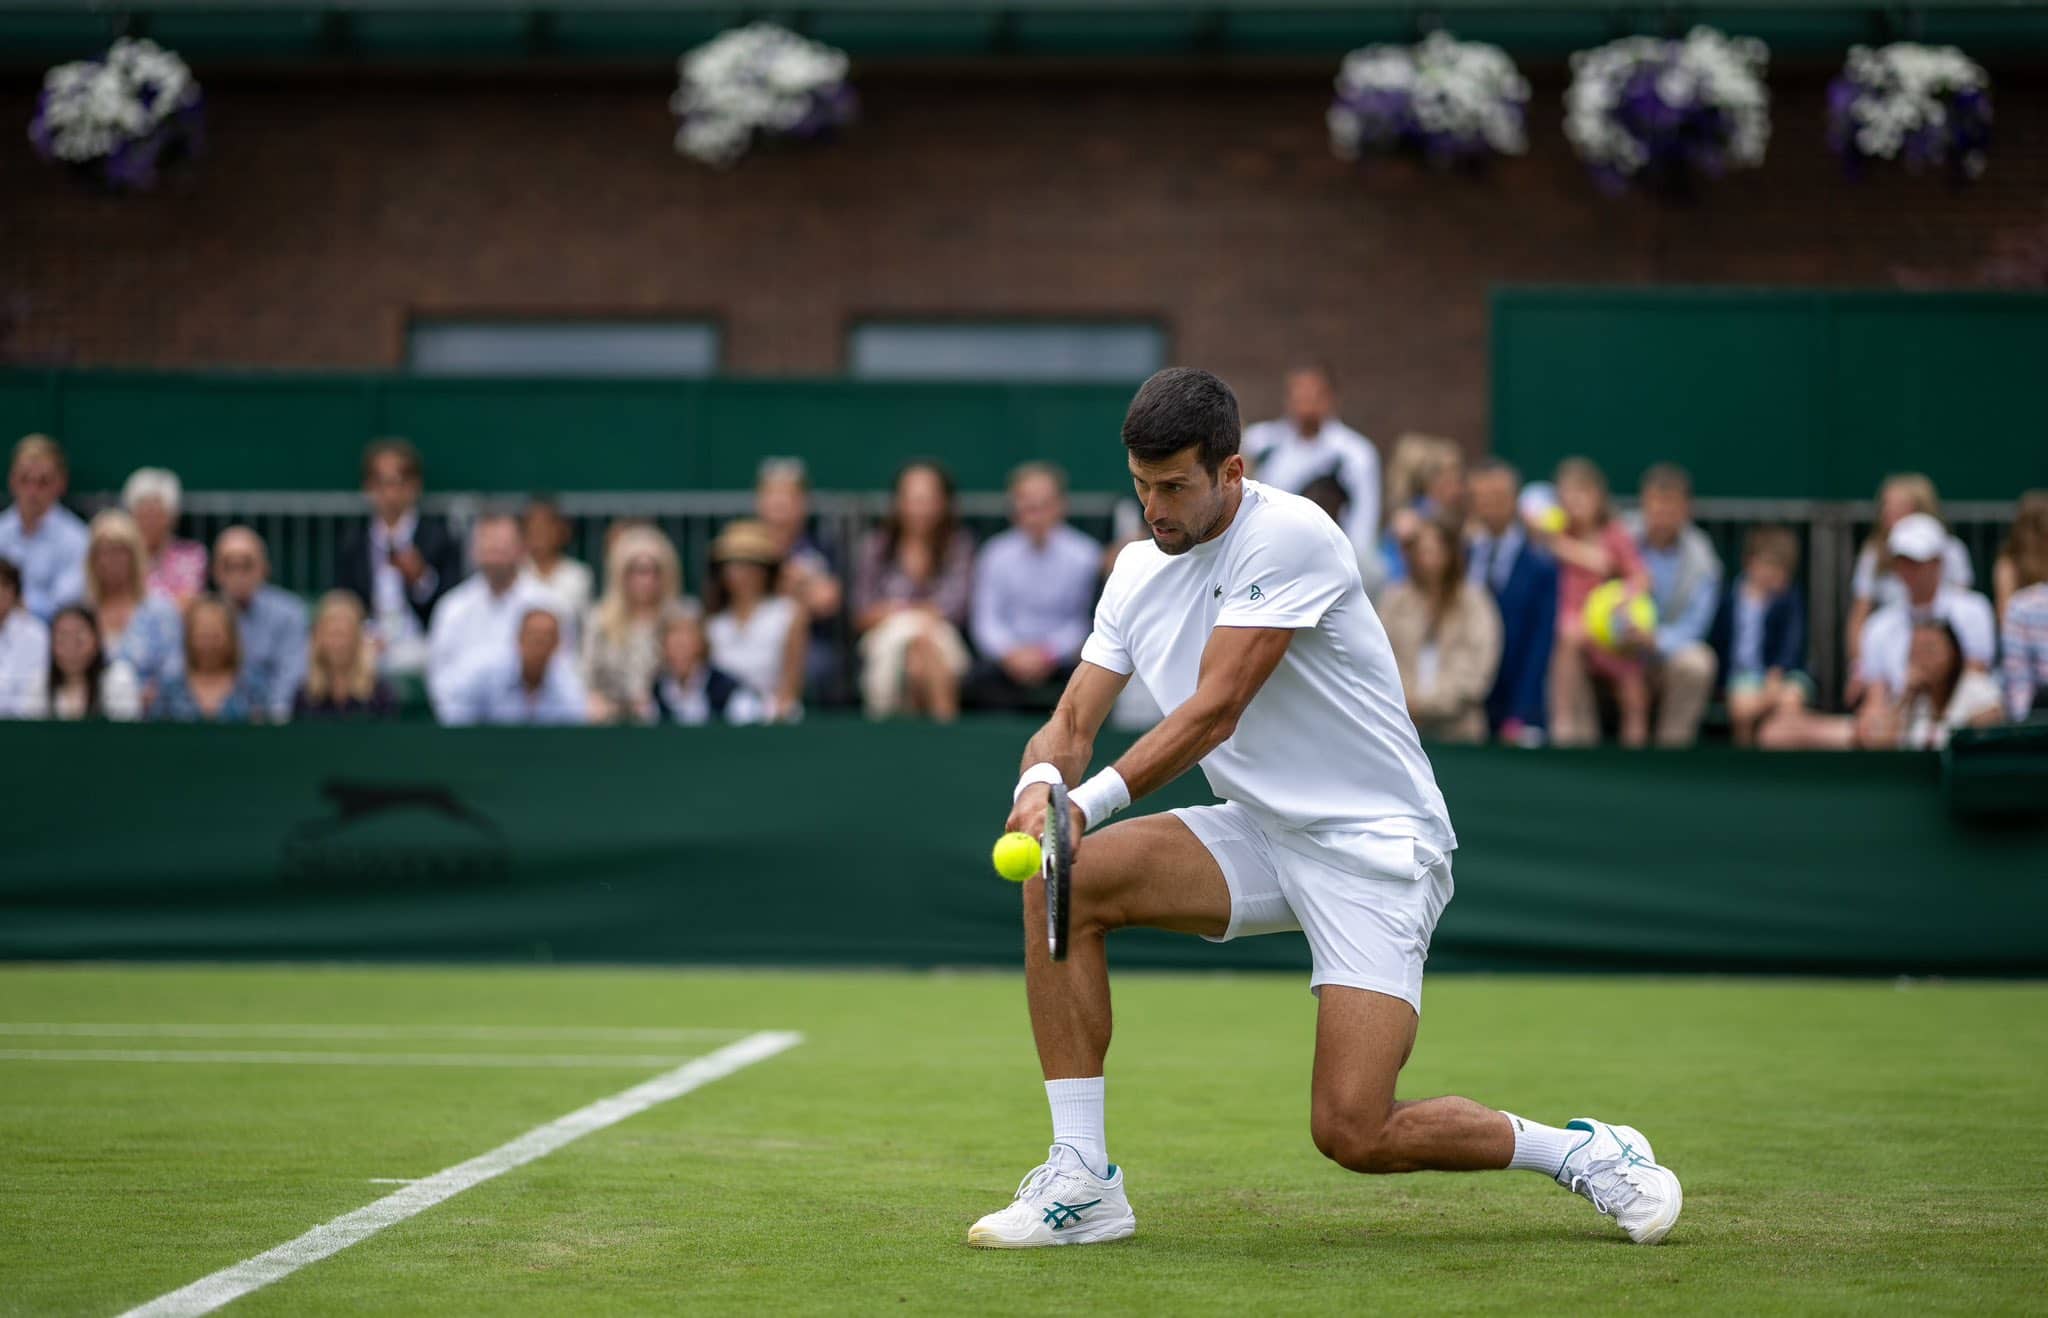 Will it be number eight for the great Novak Djokovic at Wimbledon?